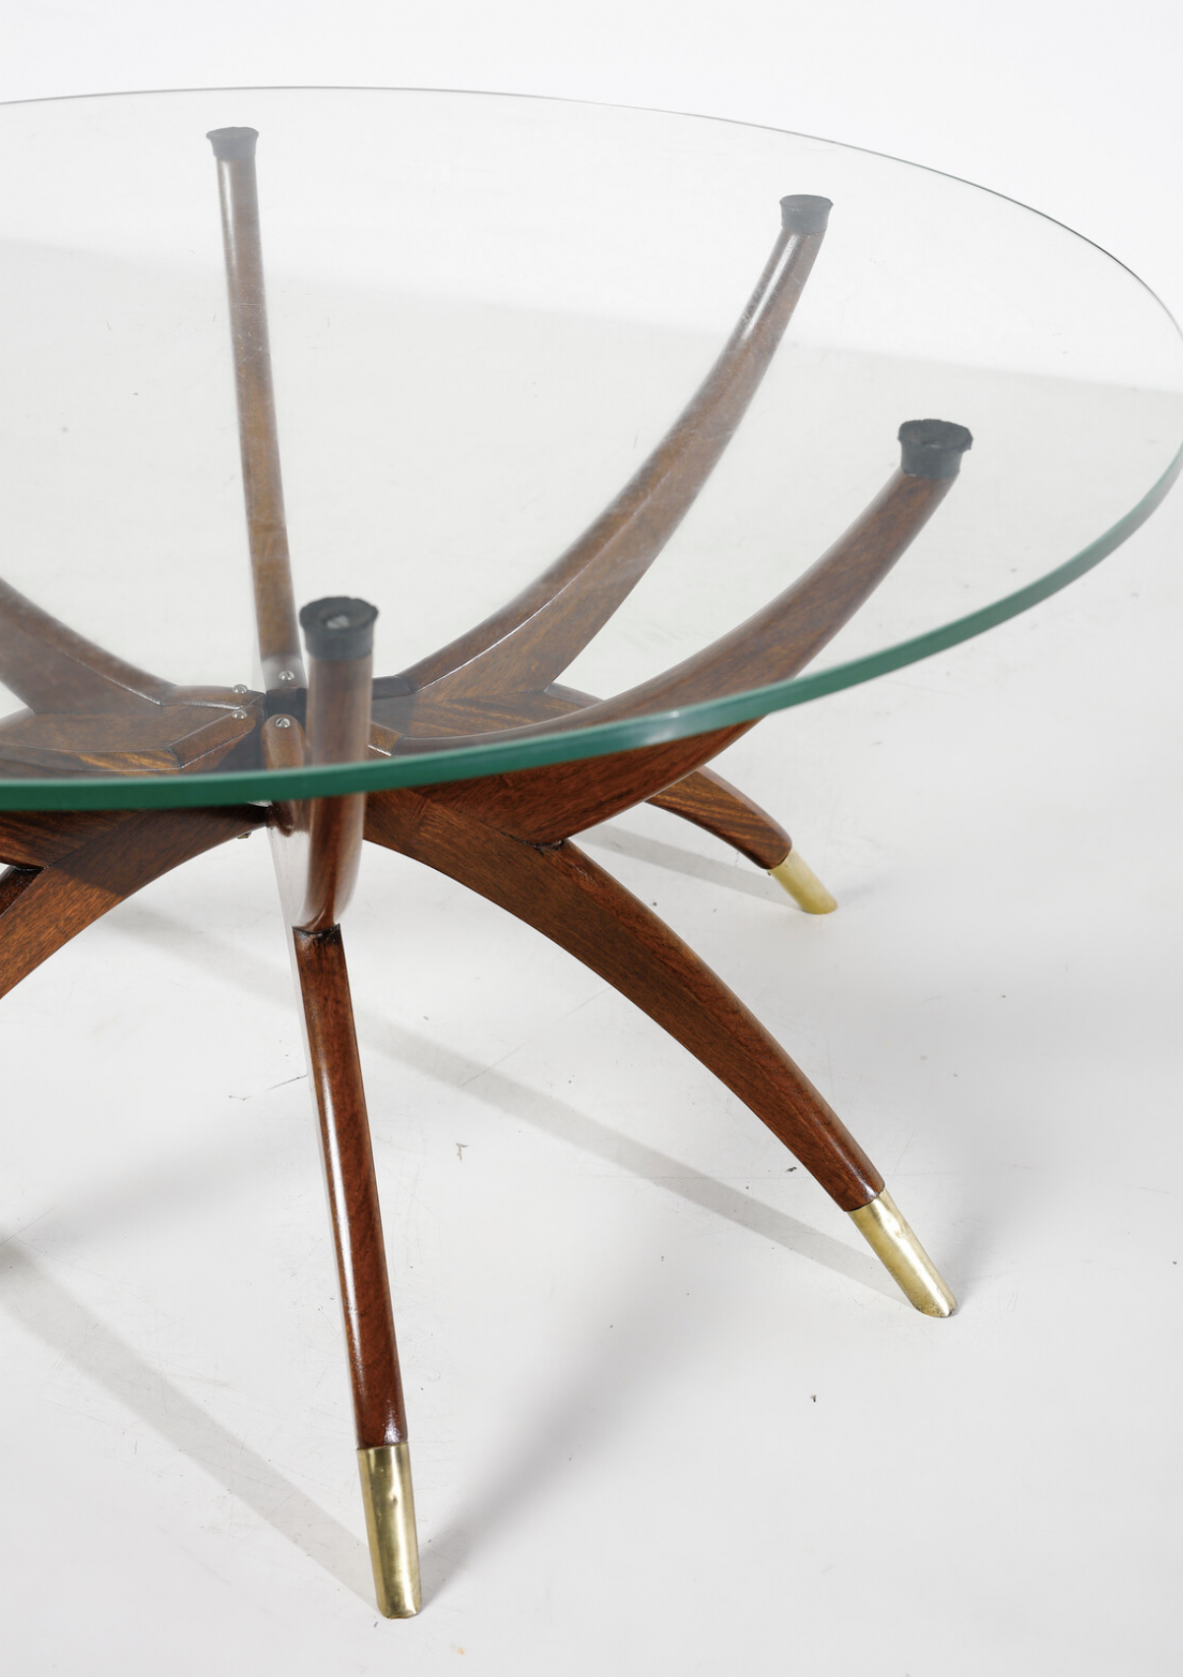 Elegant low table with 6 legs in curved wood with brass tips and cut glass top '50